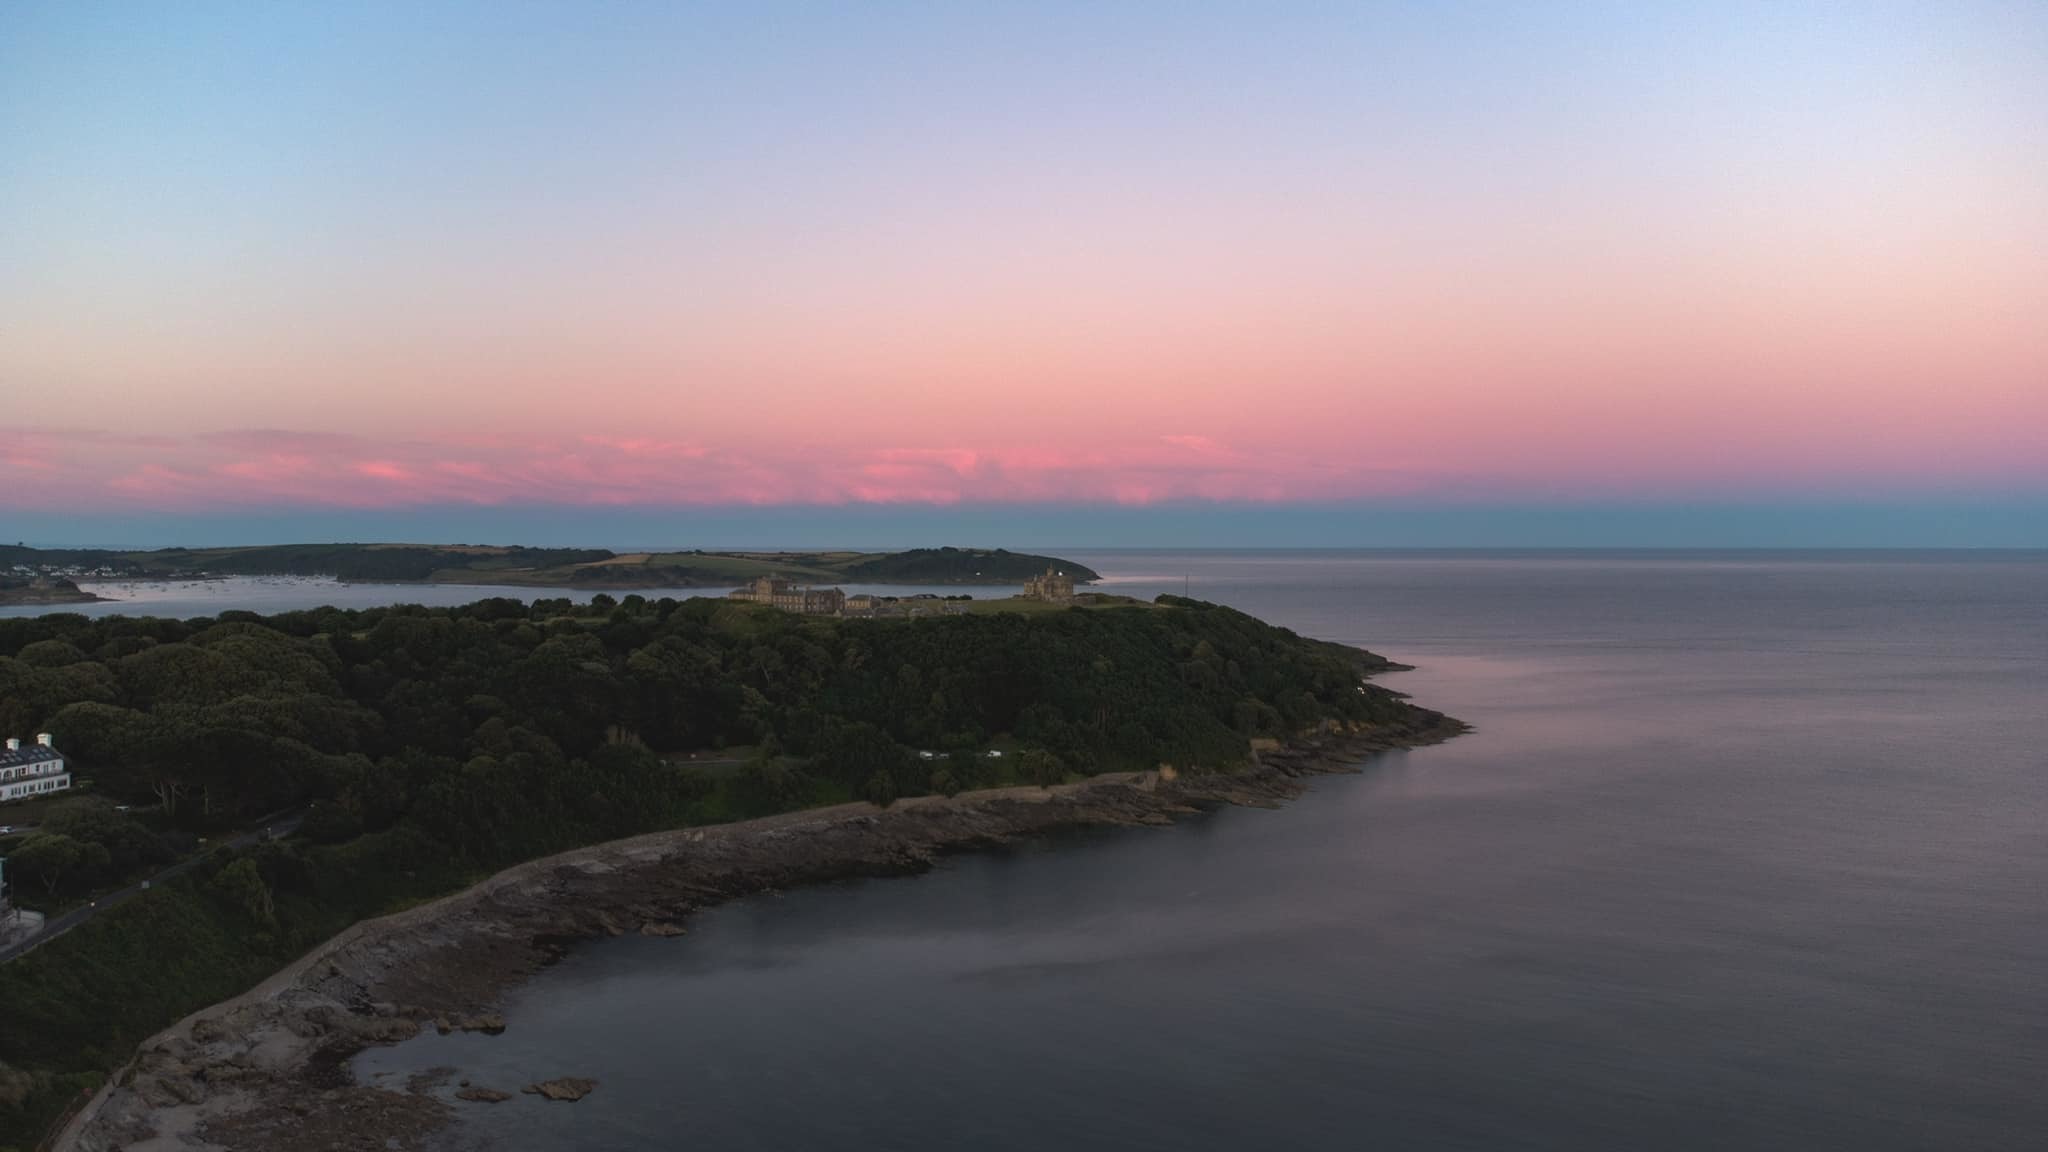 Dan West uses his drone over the sea at Falmouth, as the sun sets on another Cornish day.